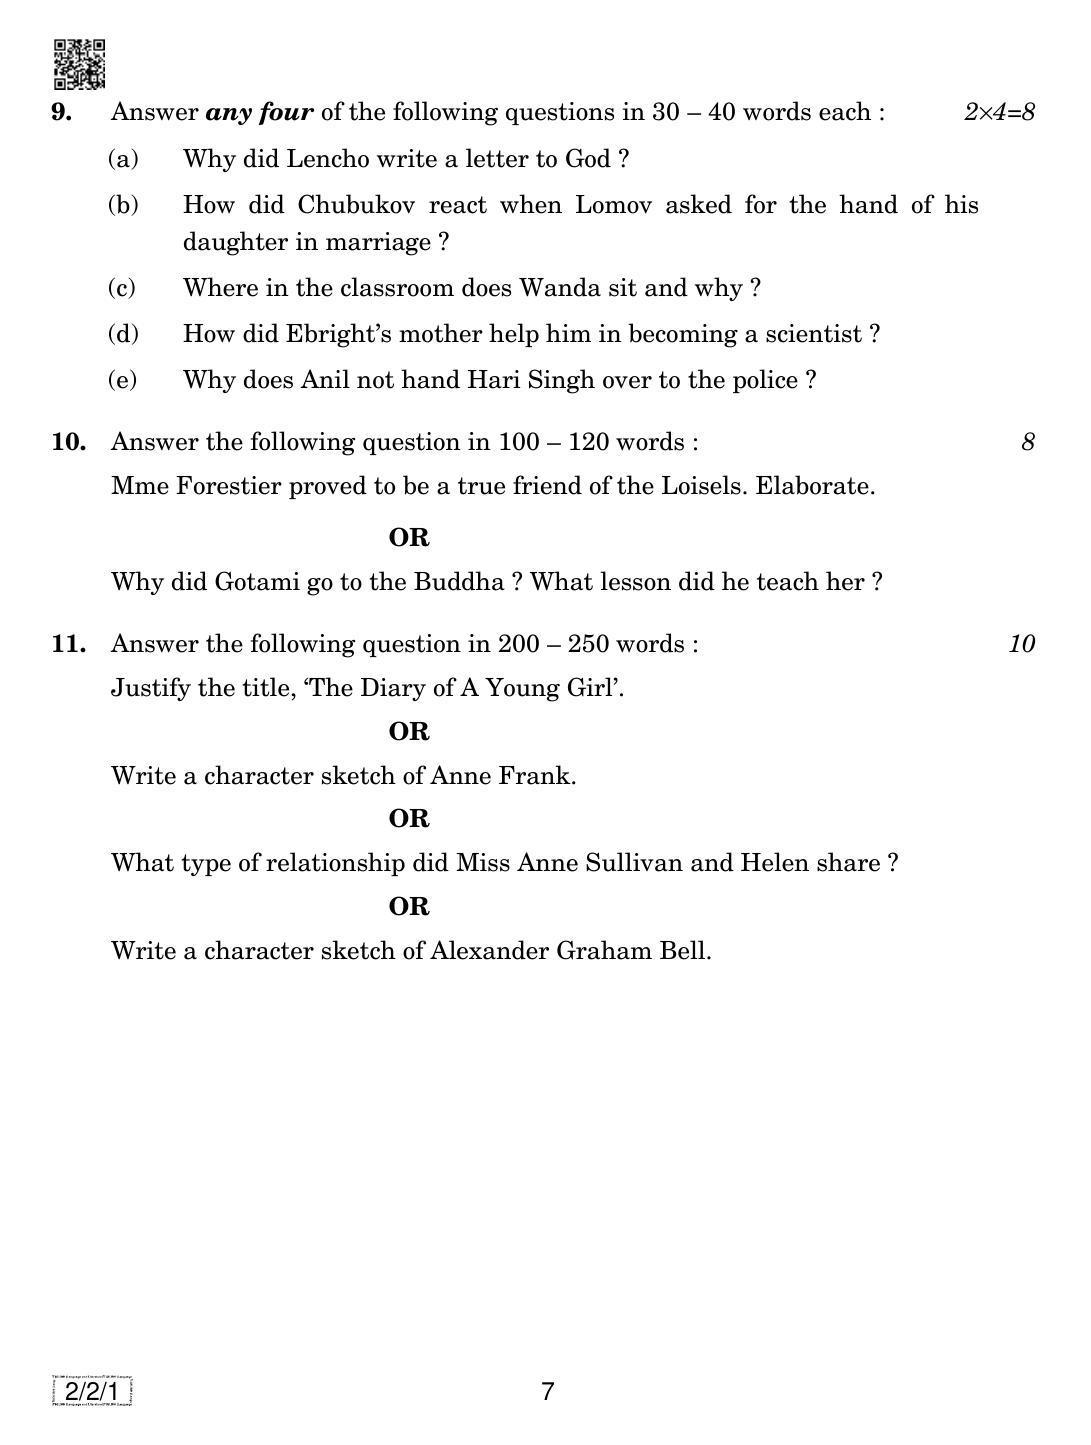 CBSE Class 10 2-2-1 ENGLISH LANGUAGE AND LETERATURE 2019 Question Paper - Page 7